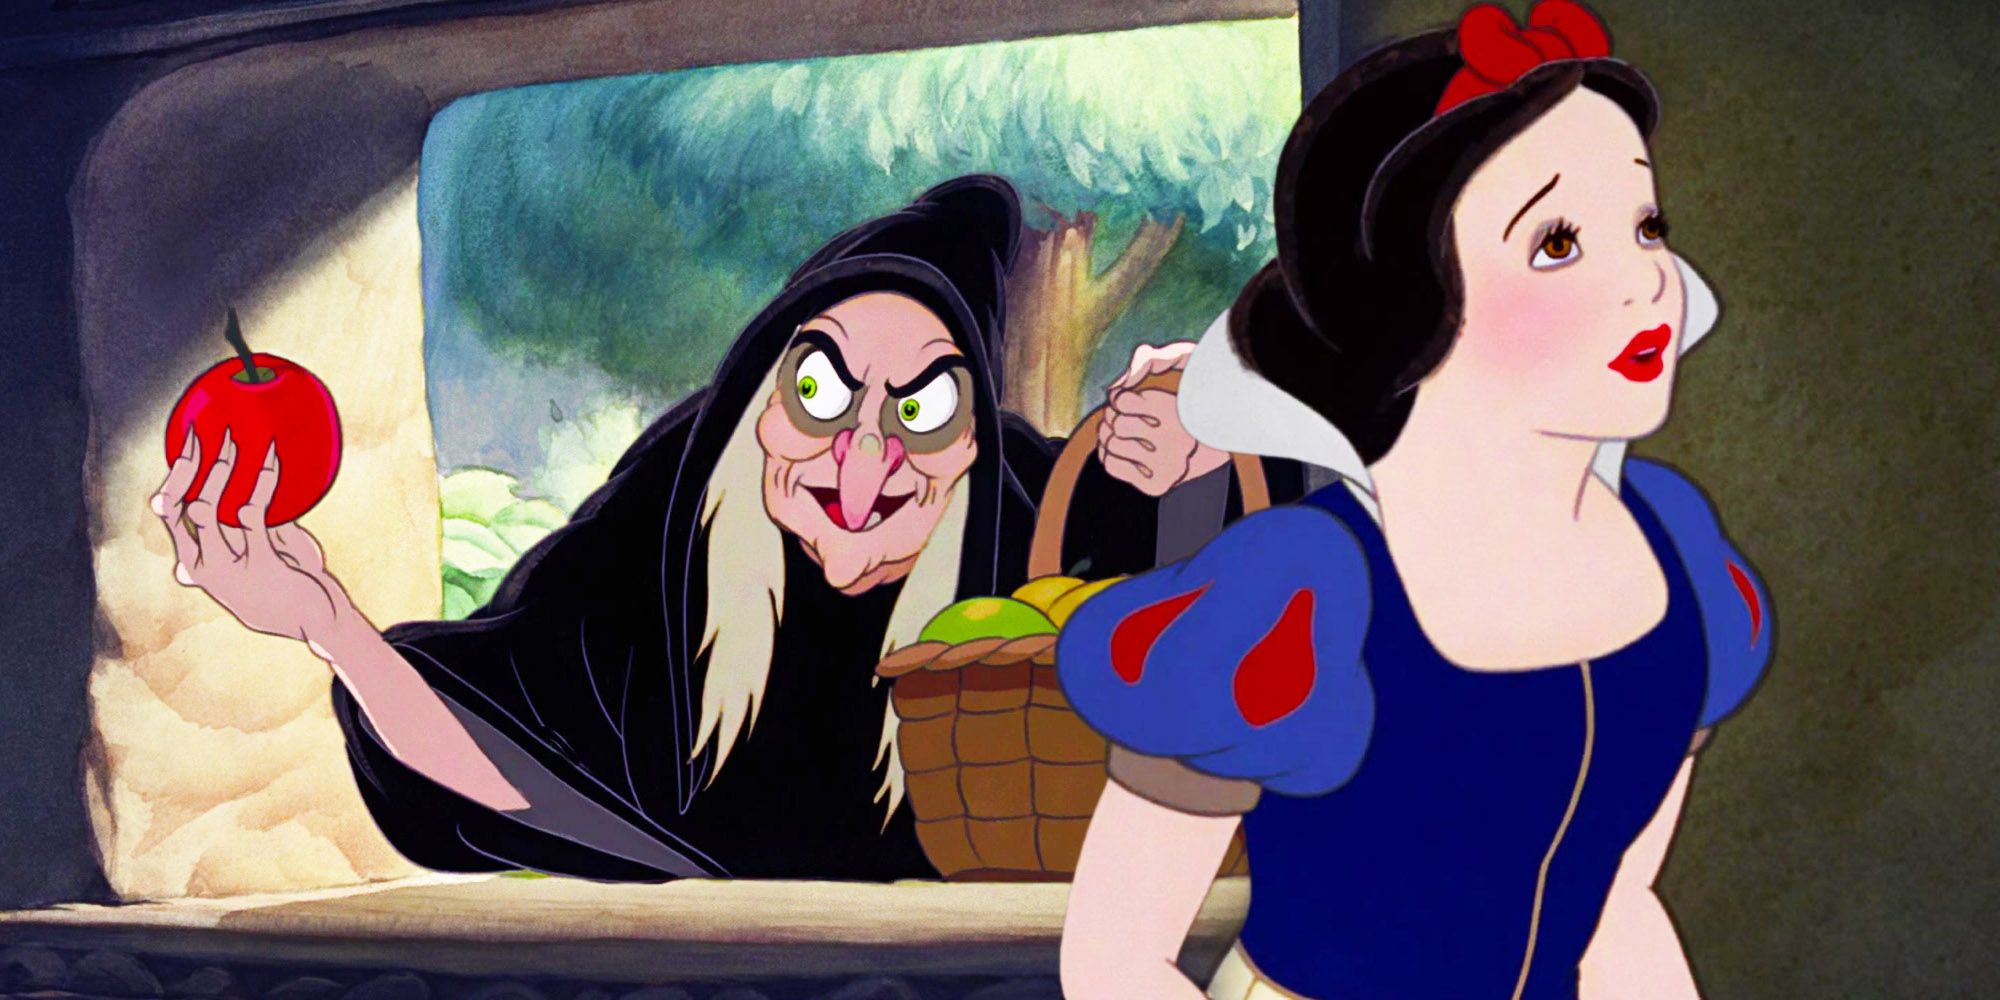 A blended image features the old crone with an apple and the princess looking to the side in Disney's animated Snow White